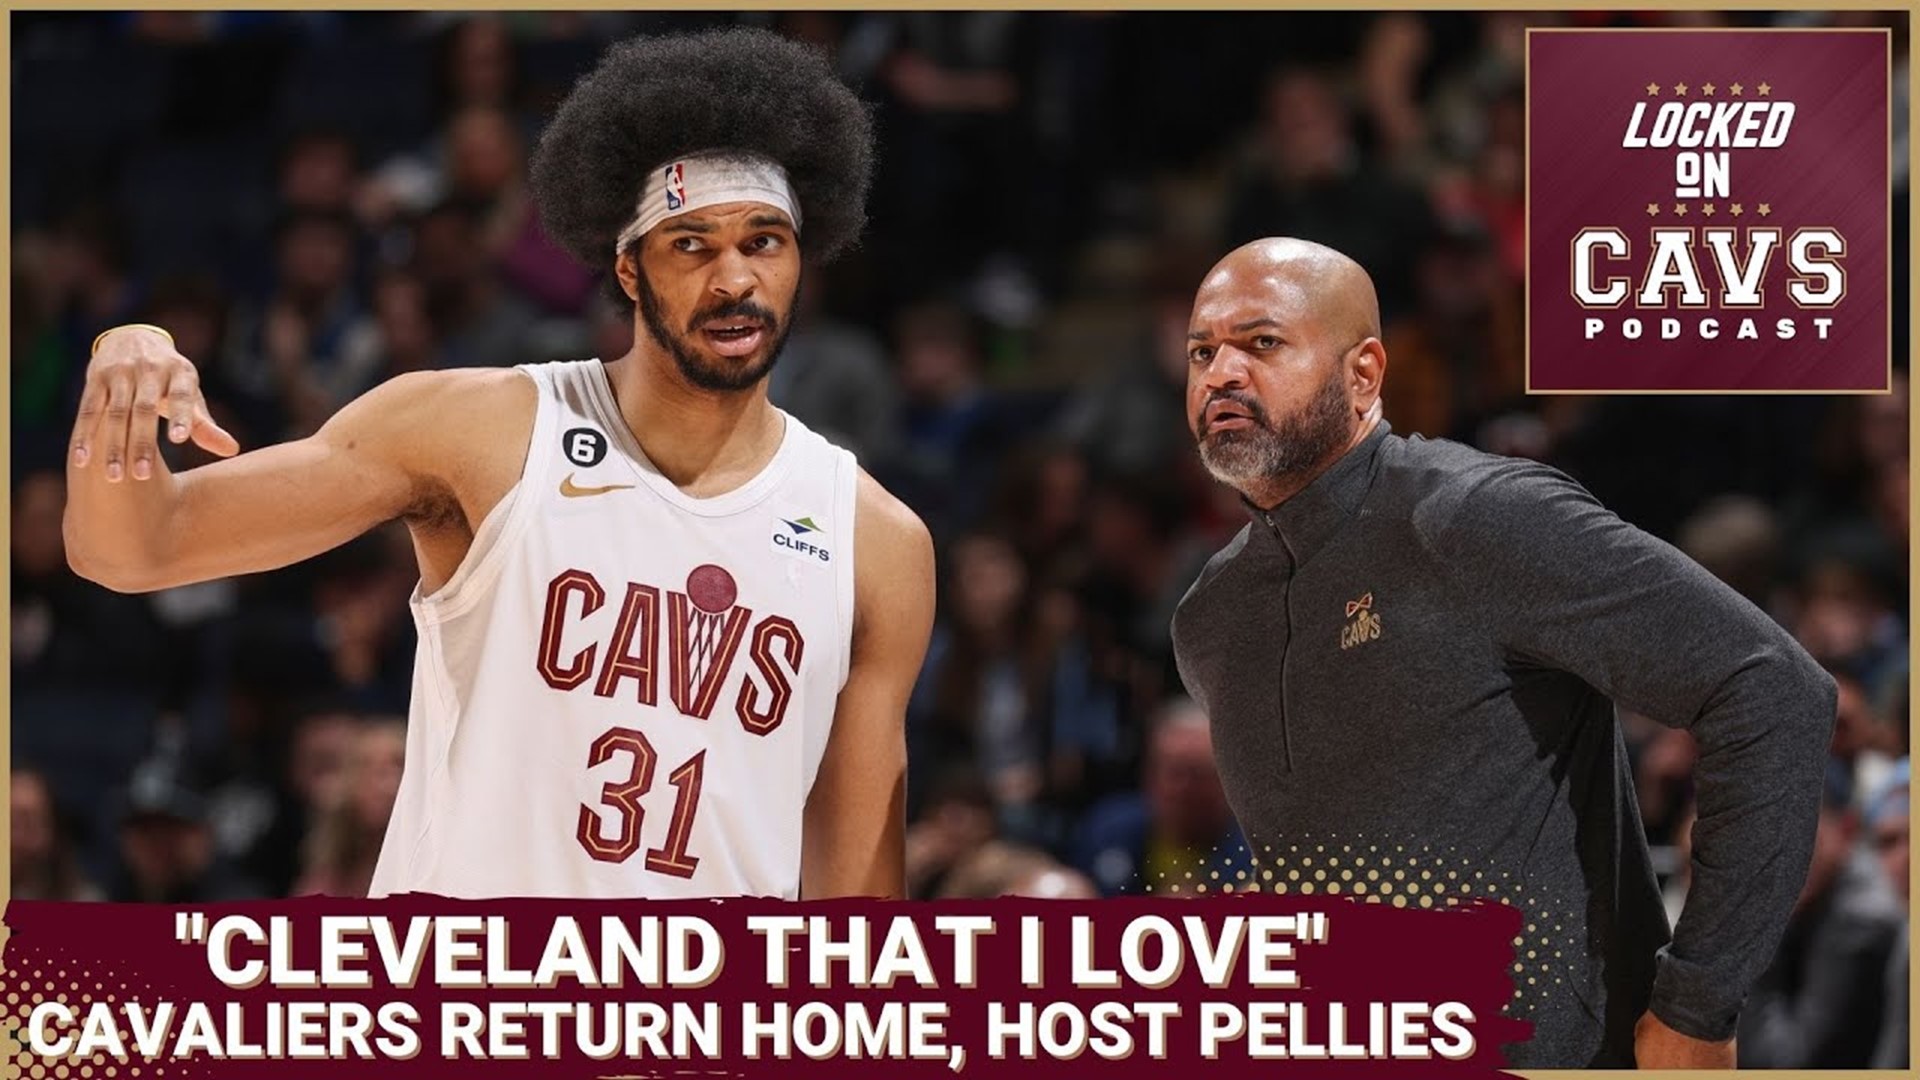 Evan Dammarell breaks down the end of Cleveland’s trip and looks ahead to the matinee matchup between the Cavaliers and the Pelicans.